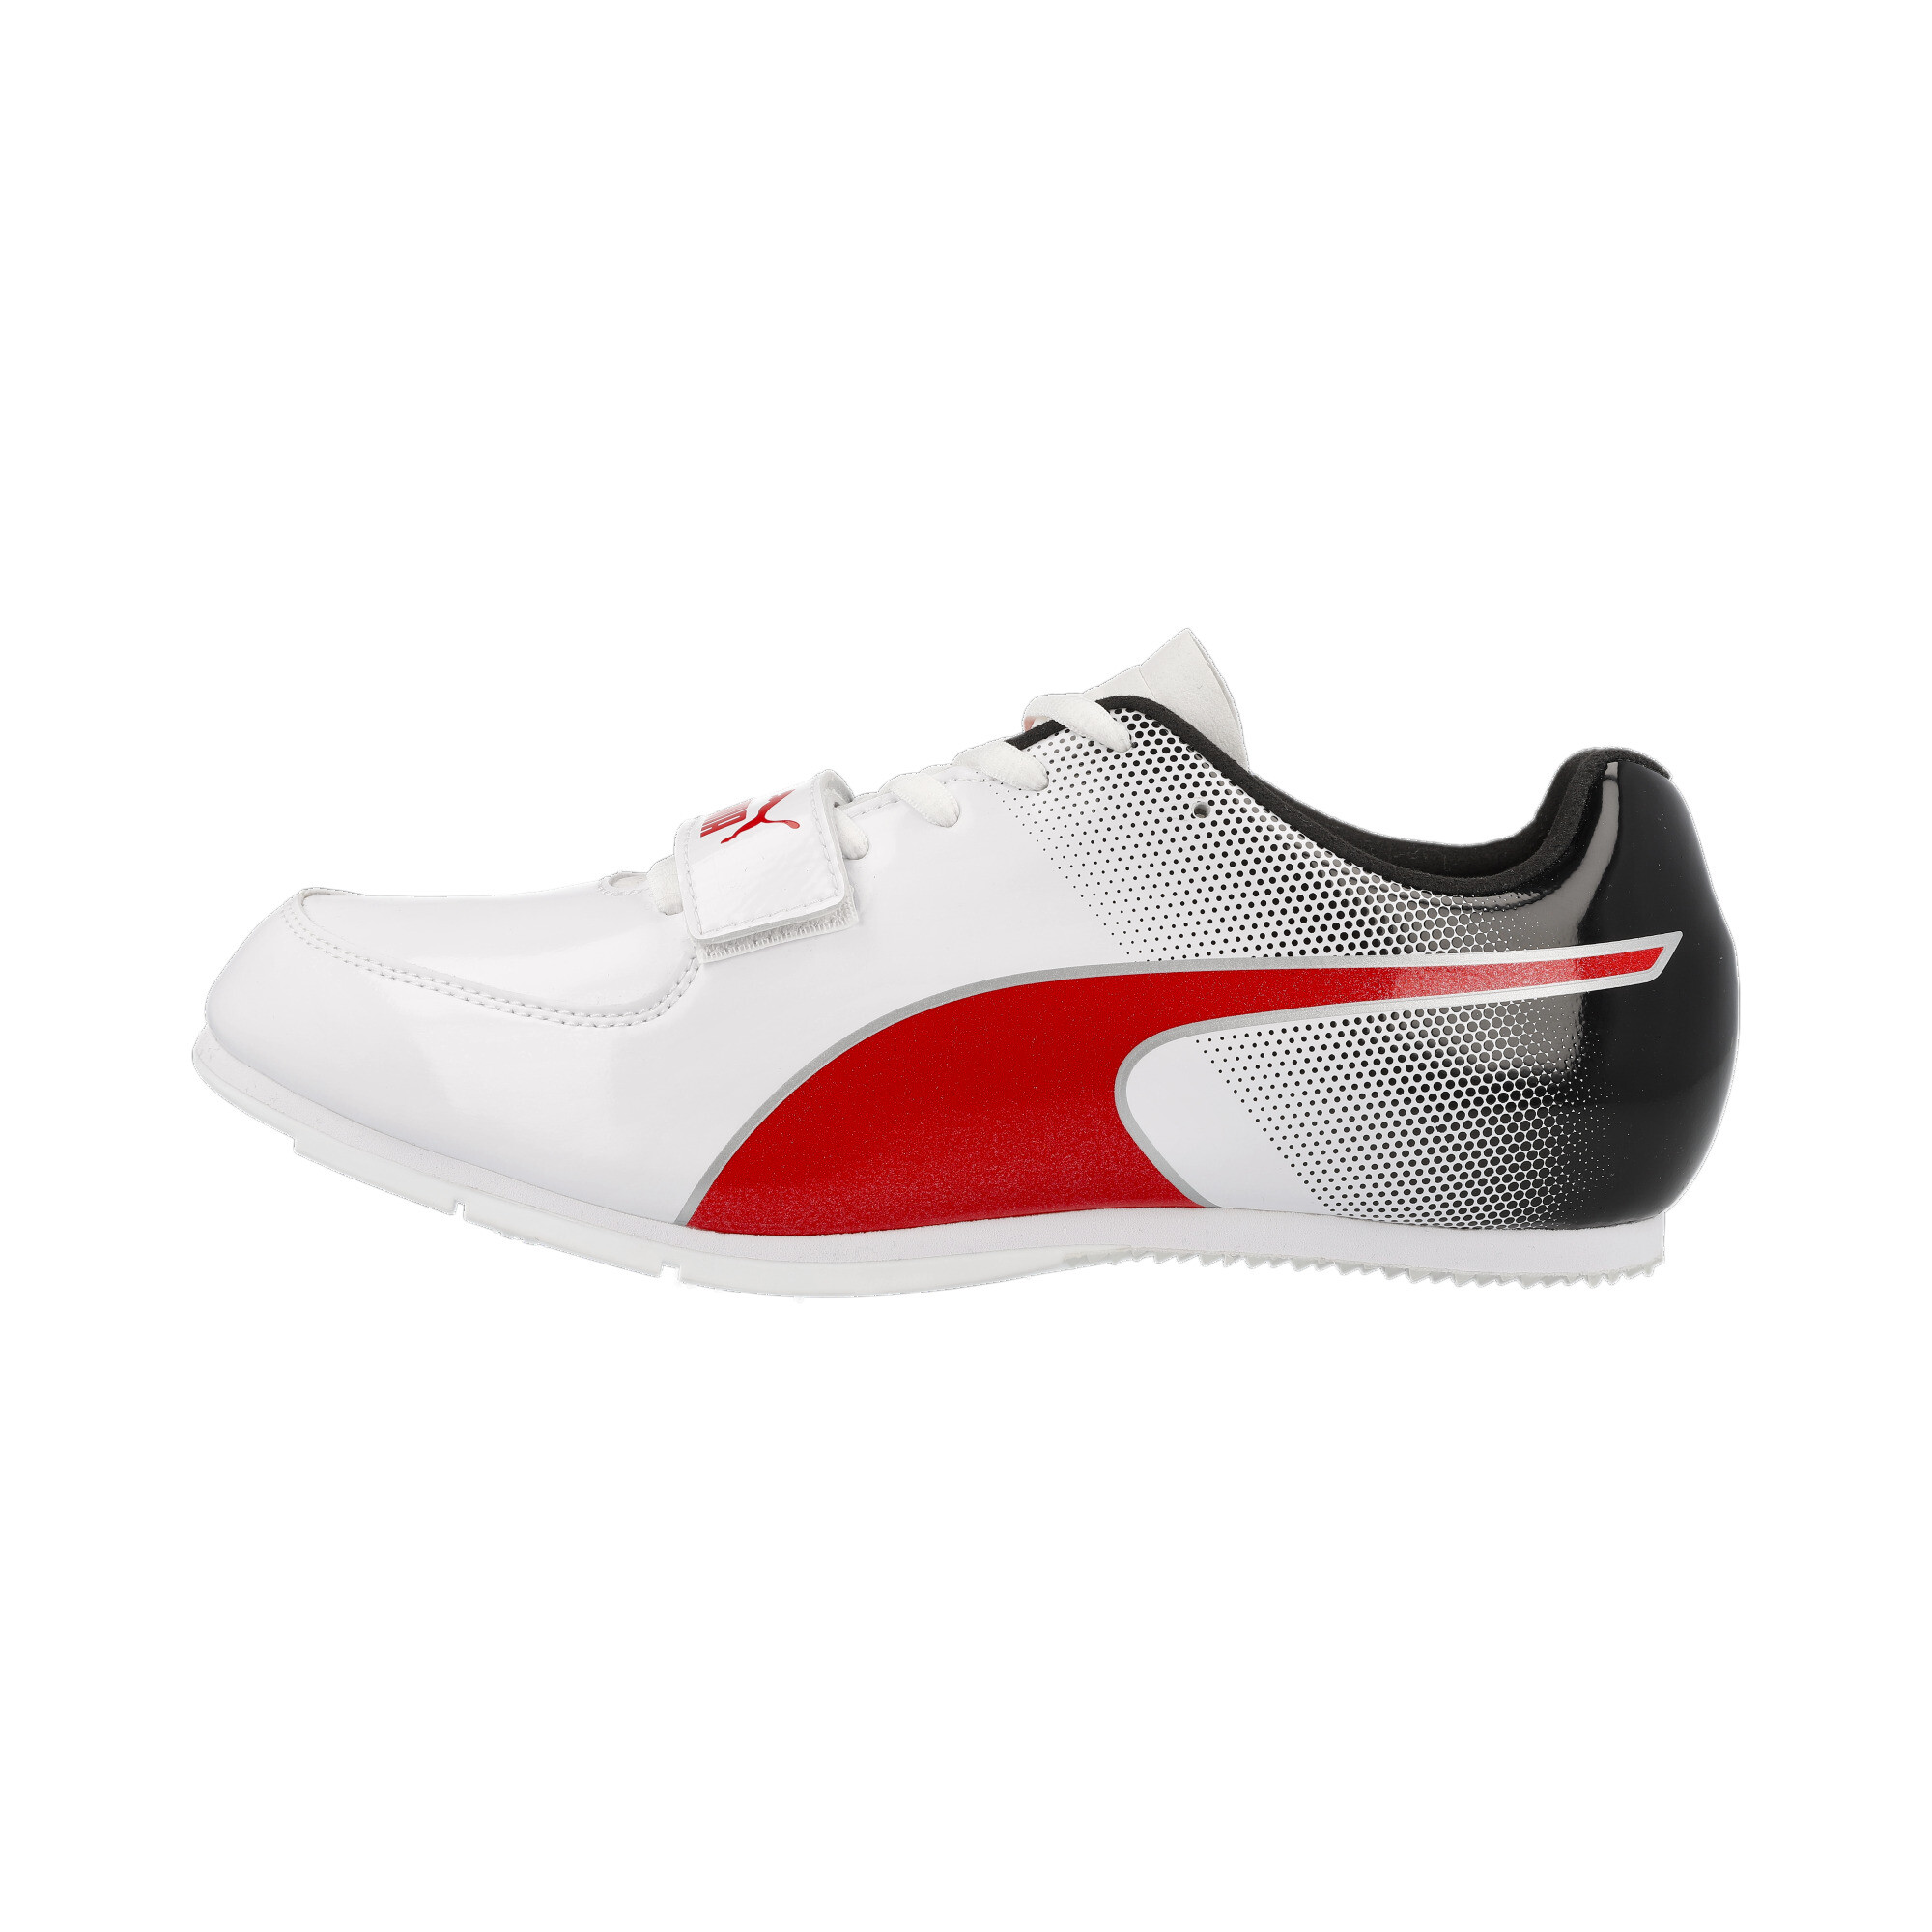 Puma Evo SPEED Long Jump 10 Track And Field Shoes, White, Size 42, Shoes